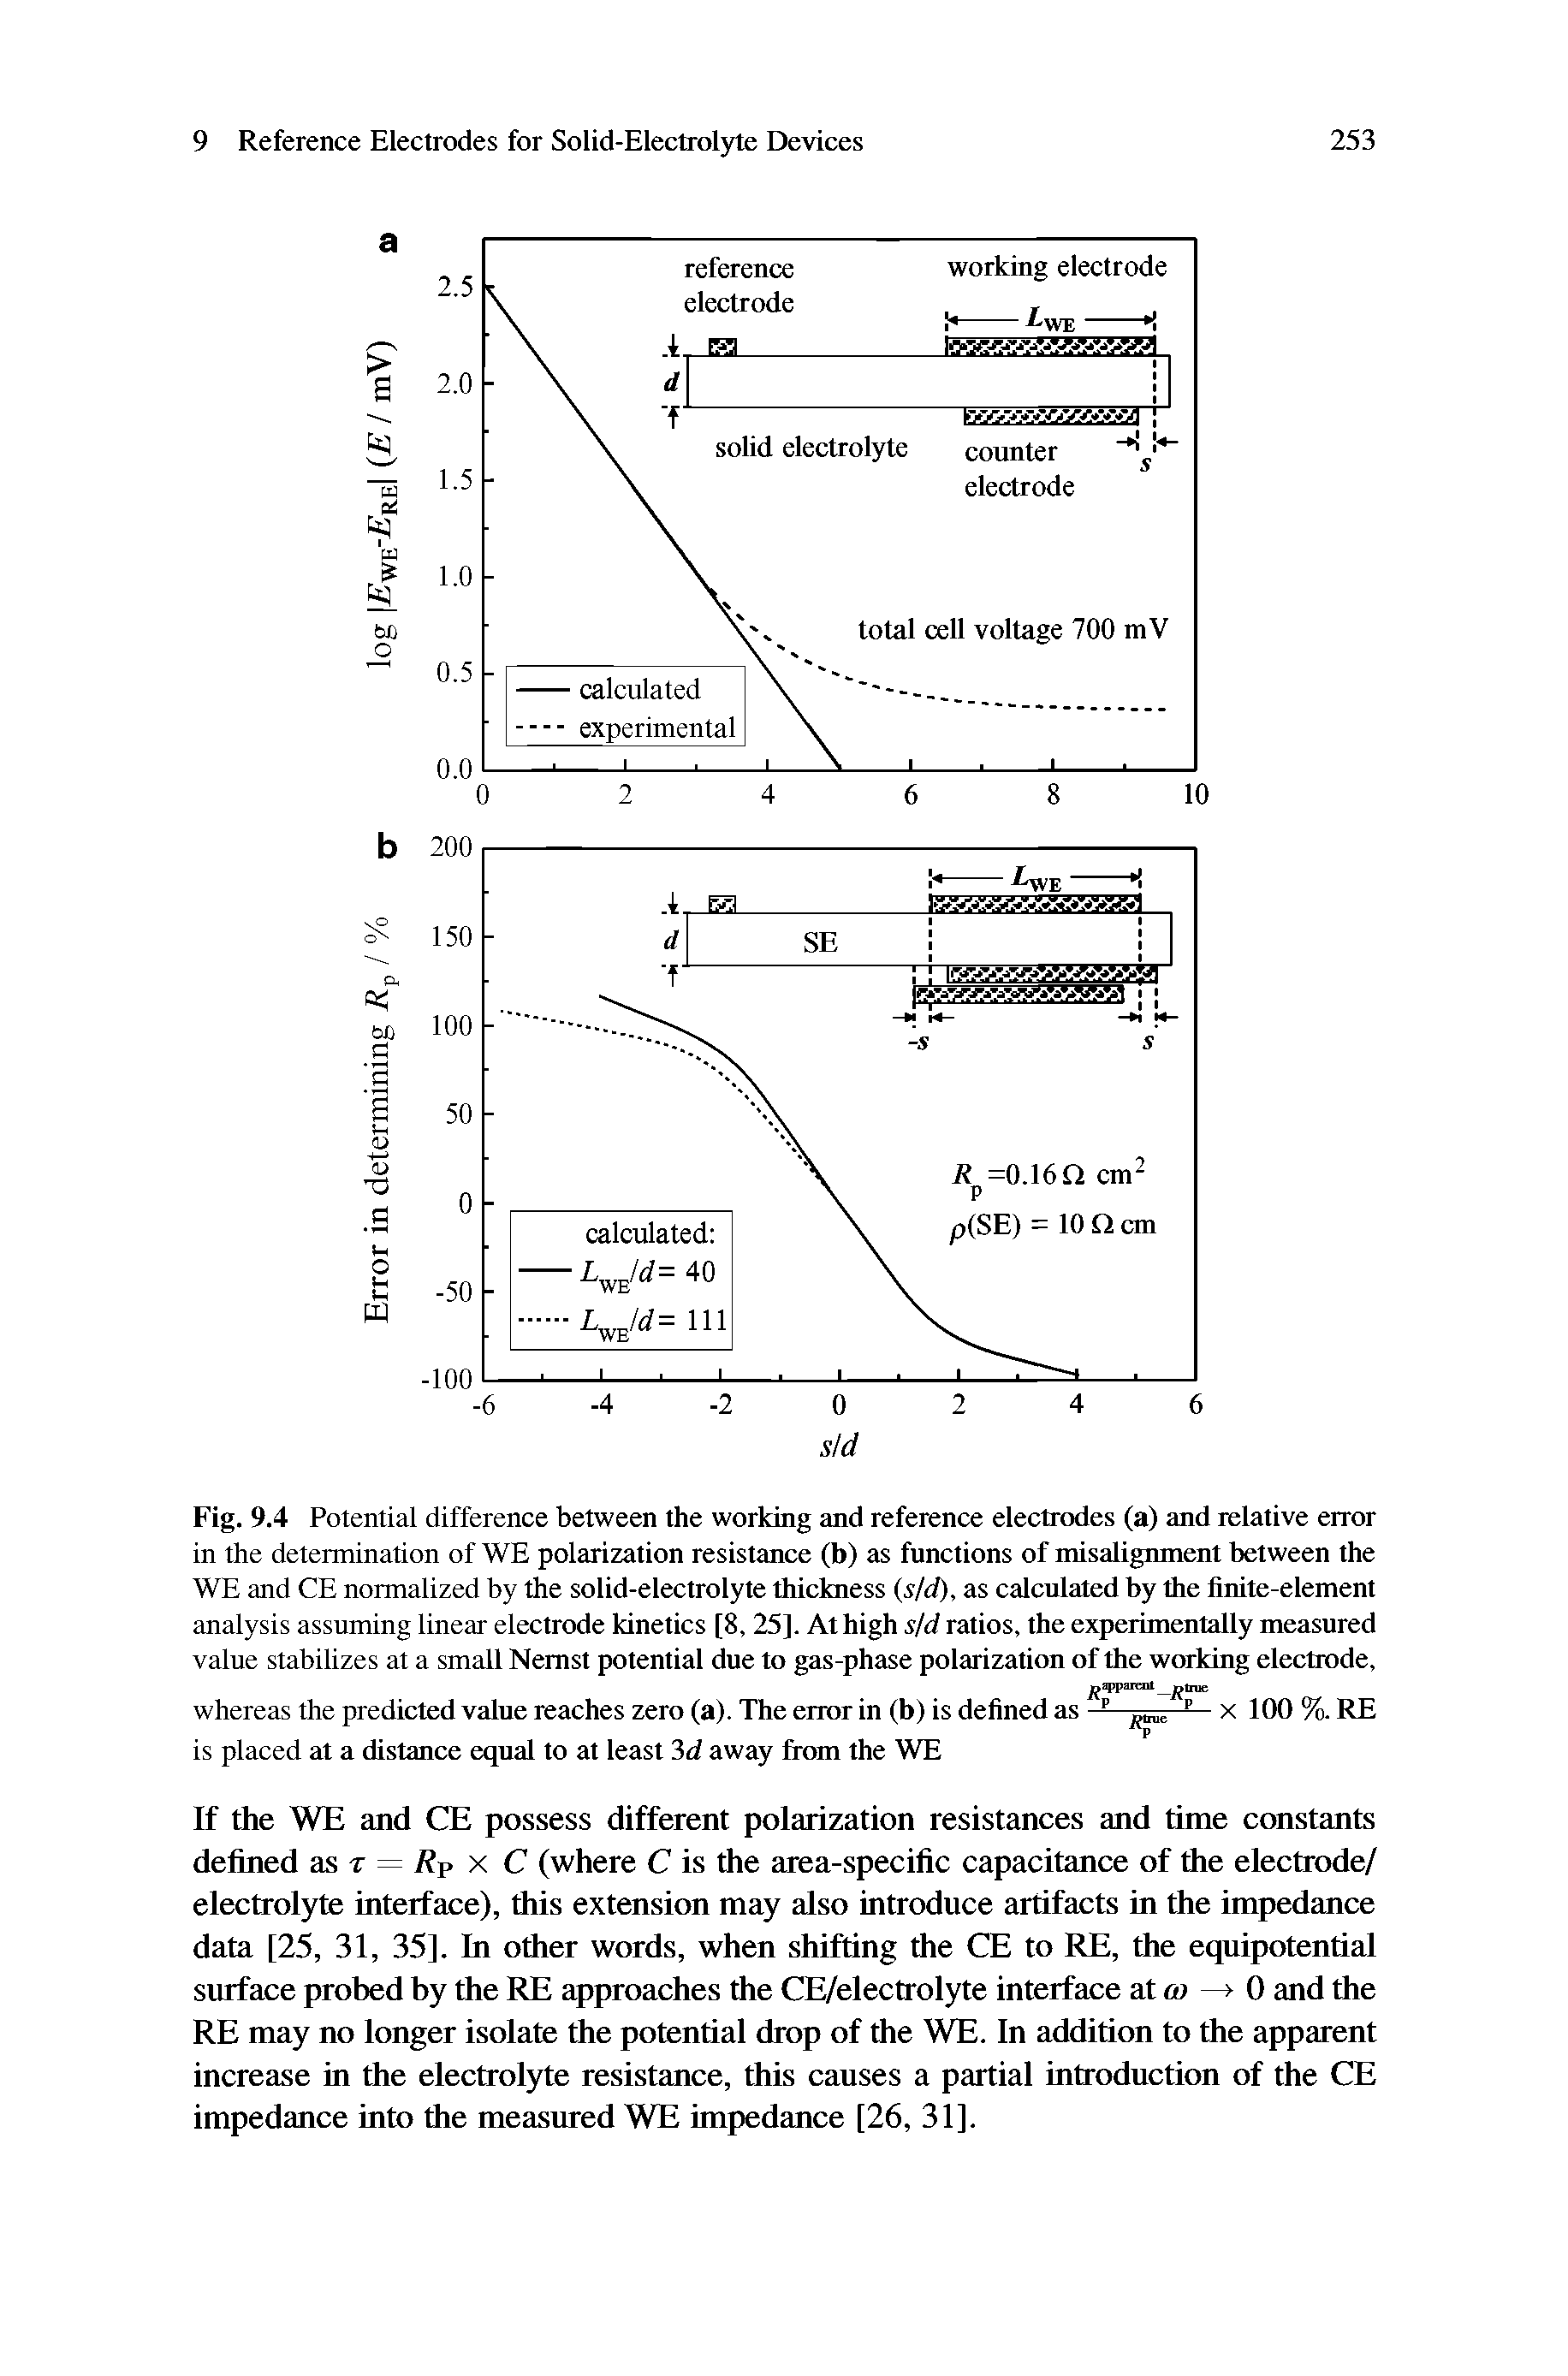 Fig. 9.4 Potential difference between the working and reference electrodes (a) and relative error in the determination of WE polarization resistance (b) as functions of misalignment between the WE and CE normalized by the solid-electrolyte thickness (s/d), as calculated by the finite-element analysis assuming linear electrode kinetics [8, 25]. At high s/d ratios, the experimentally measured value stabilizes at a small Nemst potential due to gas-phase polarization of the working electrode,...